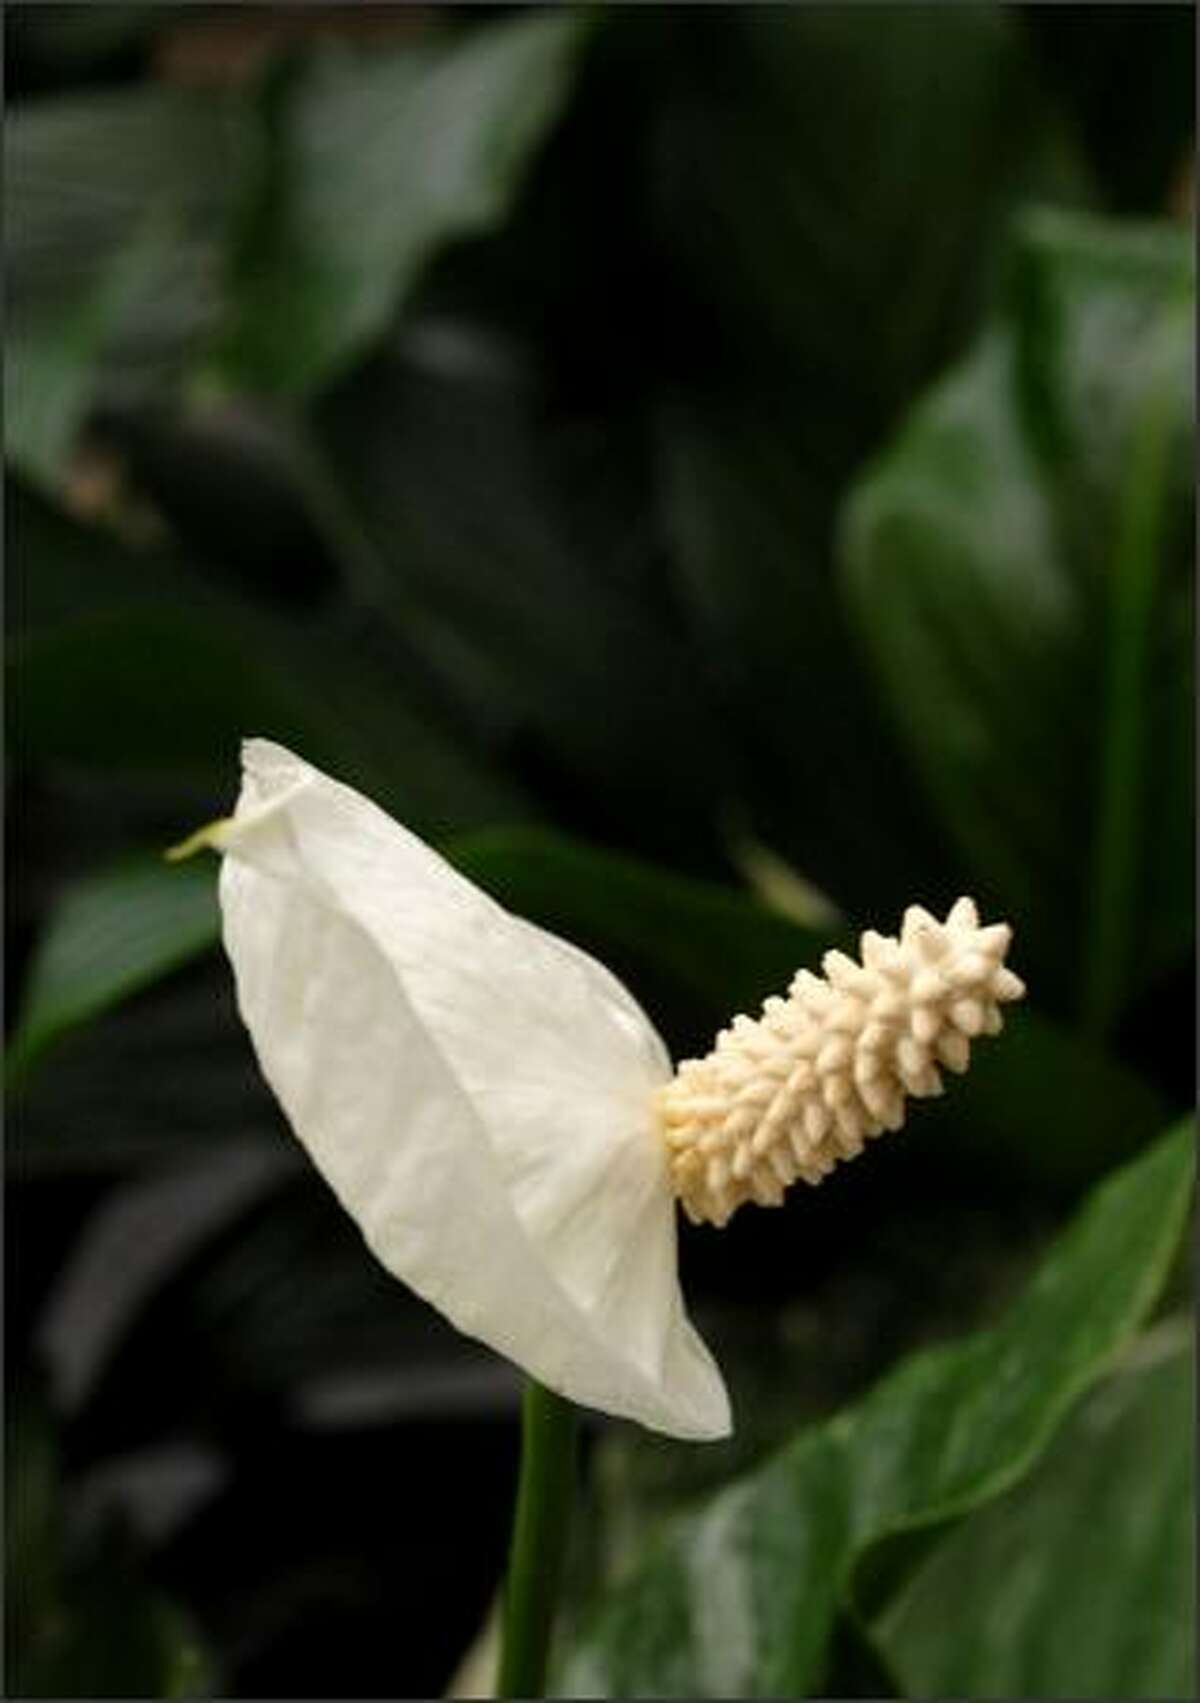 The easy peace lily can handle low light levels